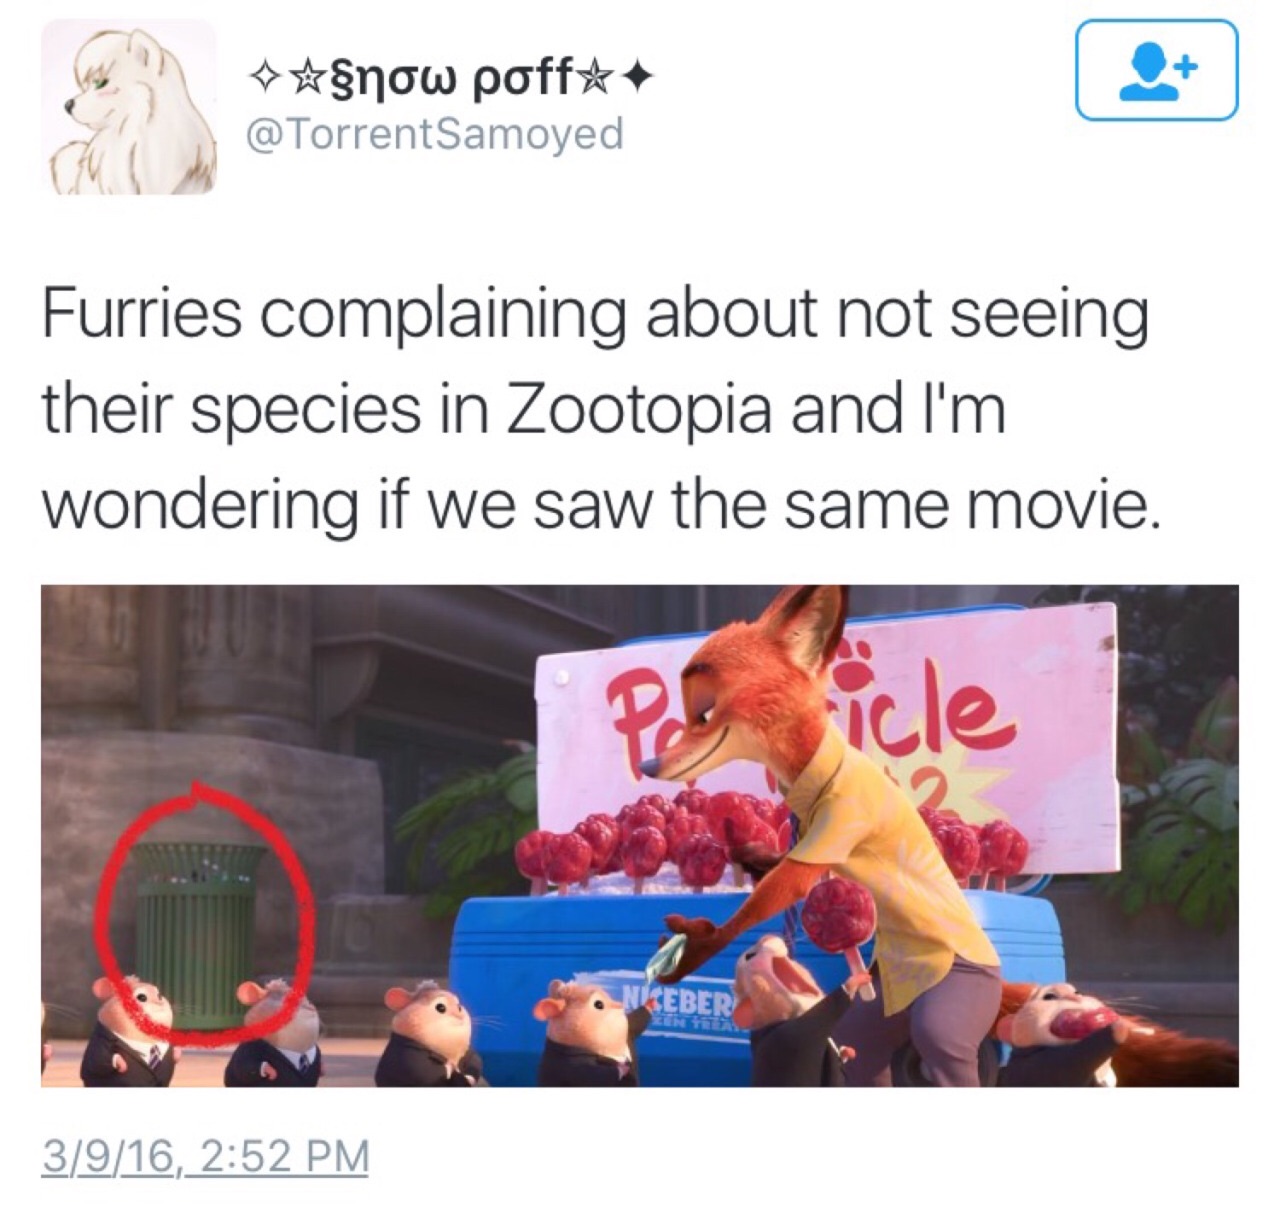 memes - furry cringe - snow poff Furries complaining about not seeing their species in Zootopia and I'm wondering if we saw the same movie. ticle Niteber 3916,